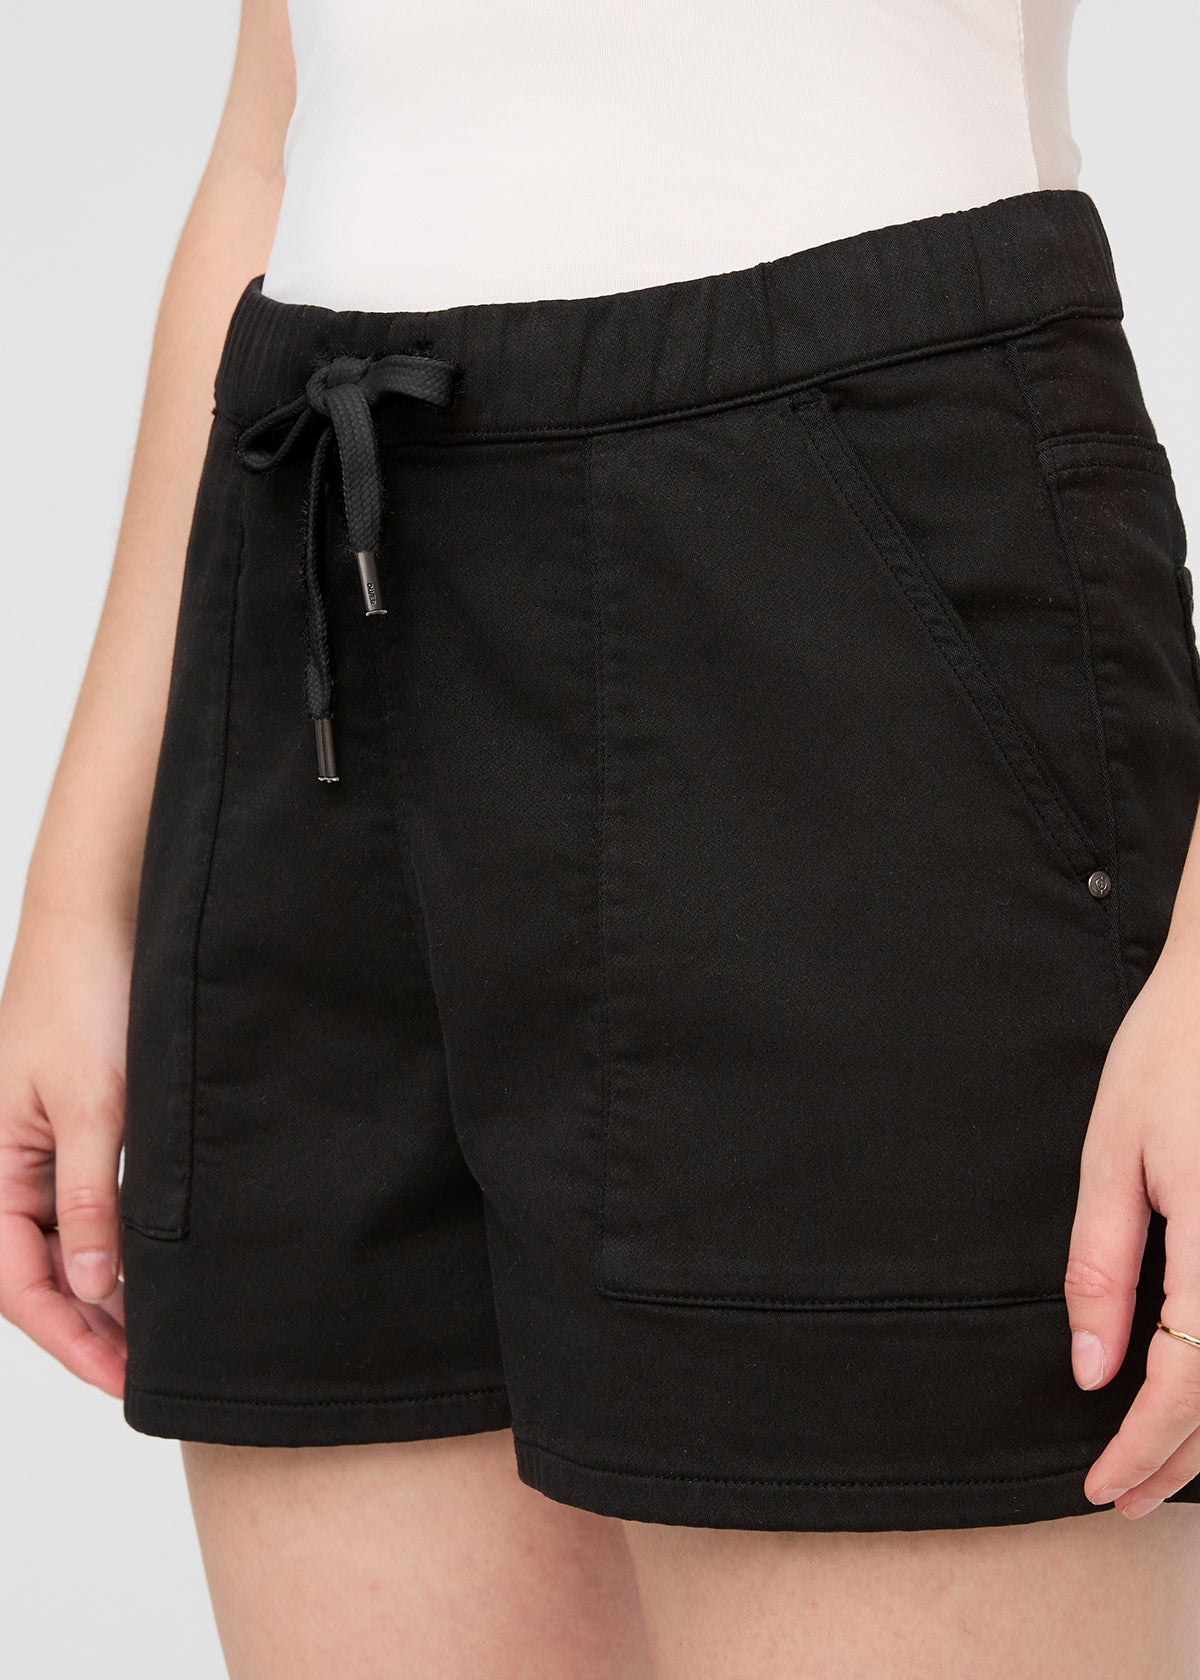 womens black pull on drawstring shorts front waistband detail